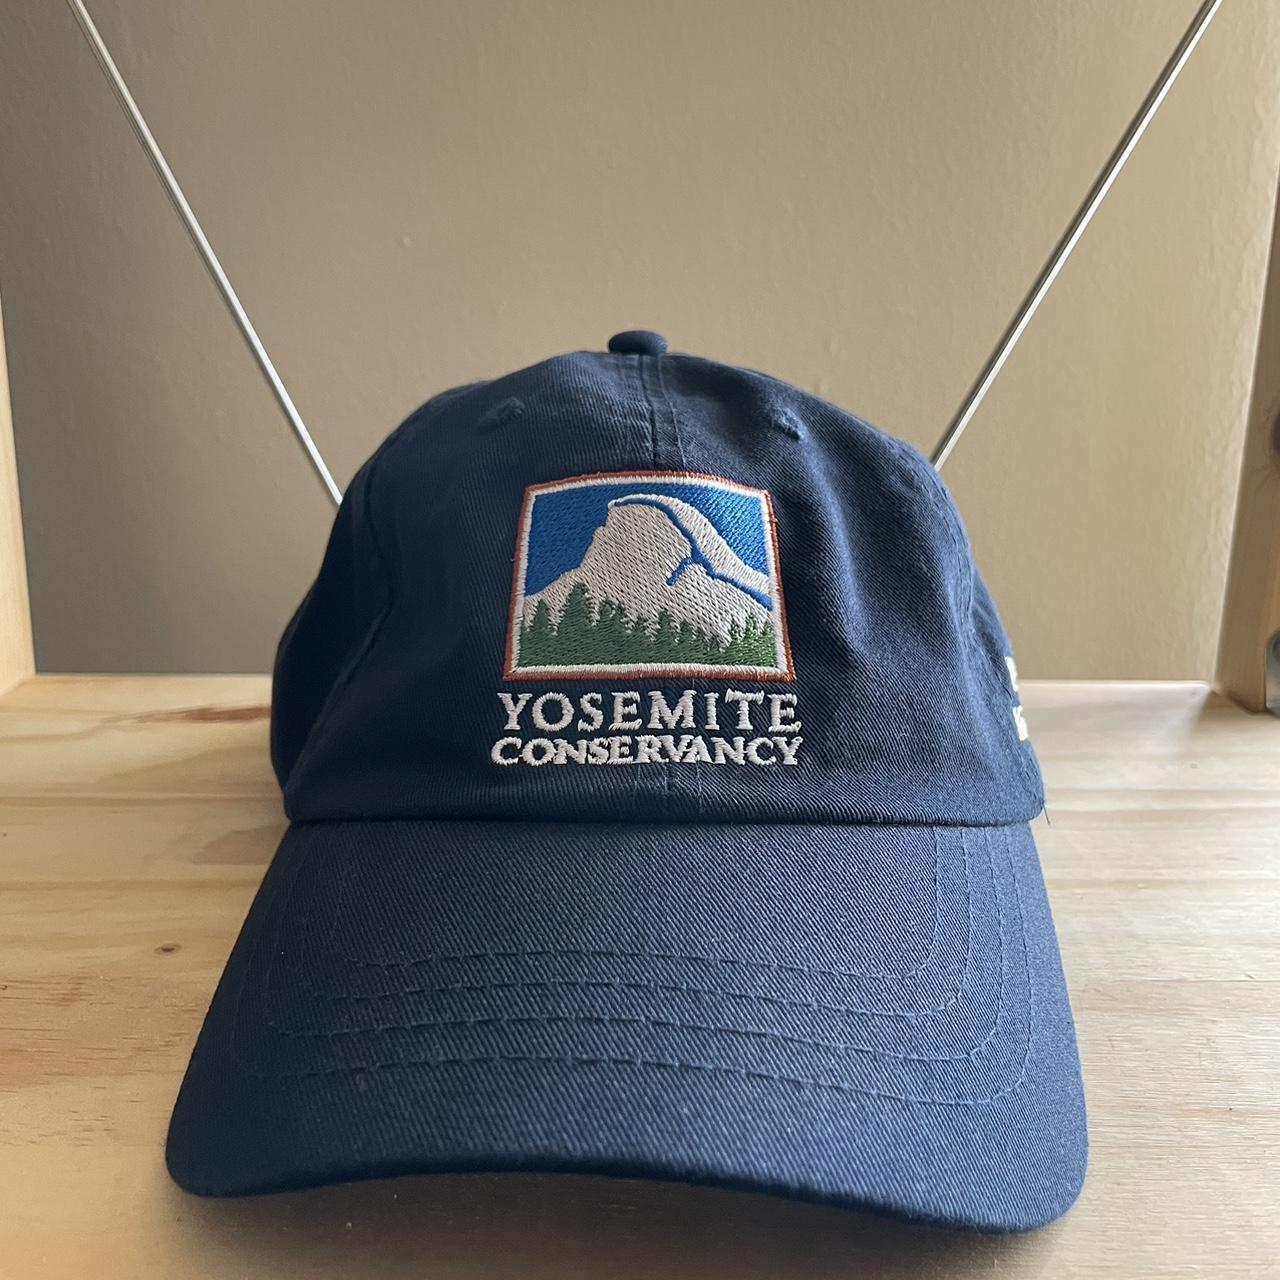 Yosemite Conservancy hat the was purchased from a - Depop